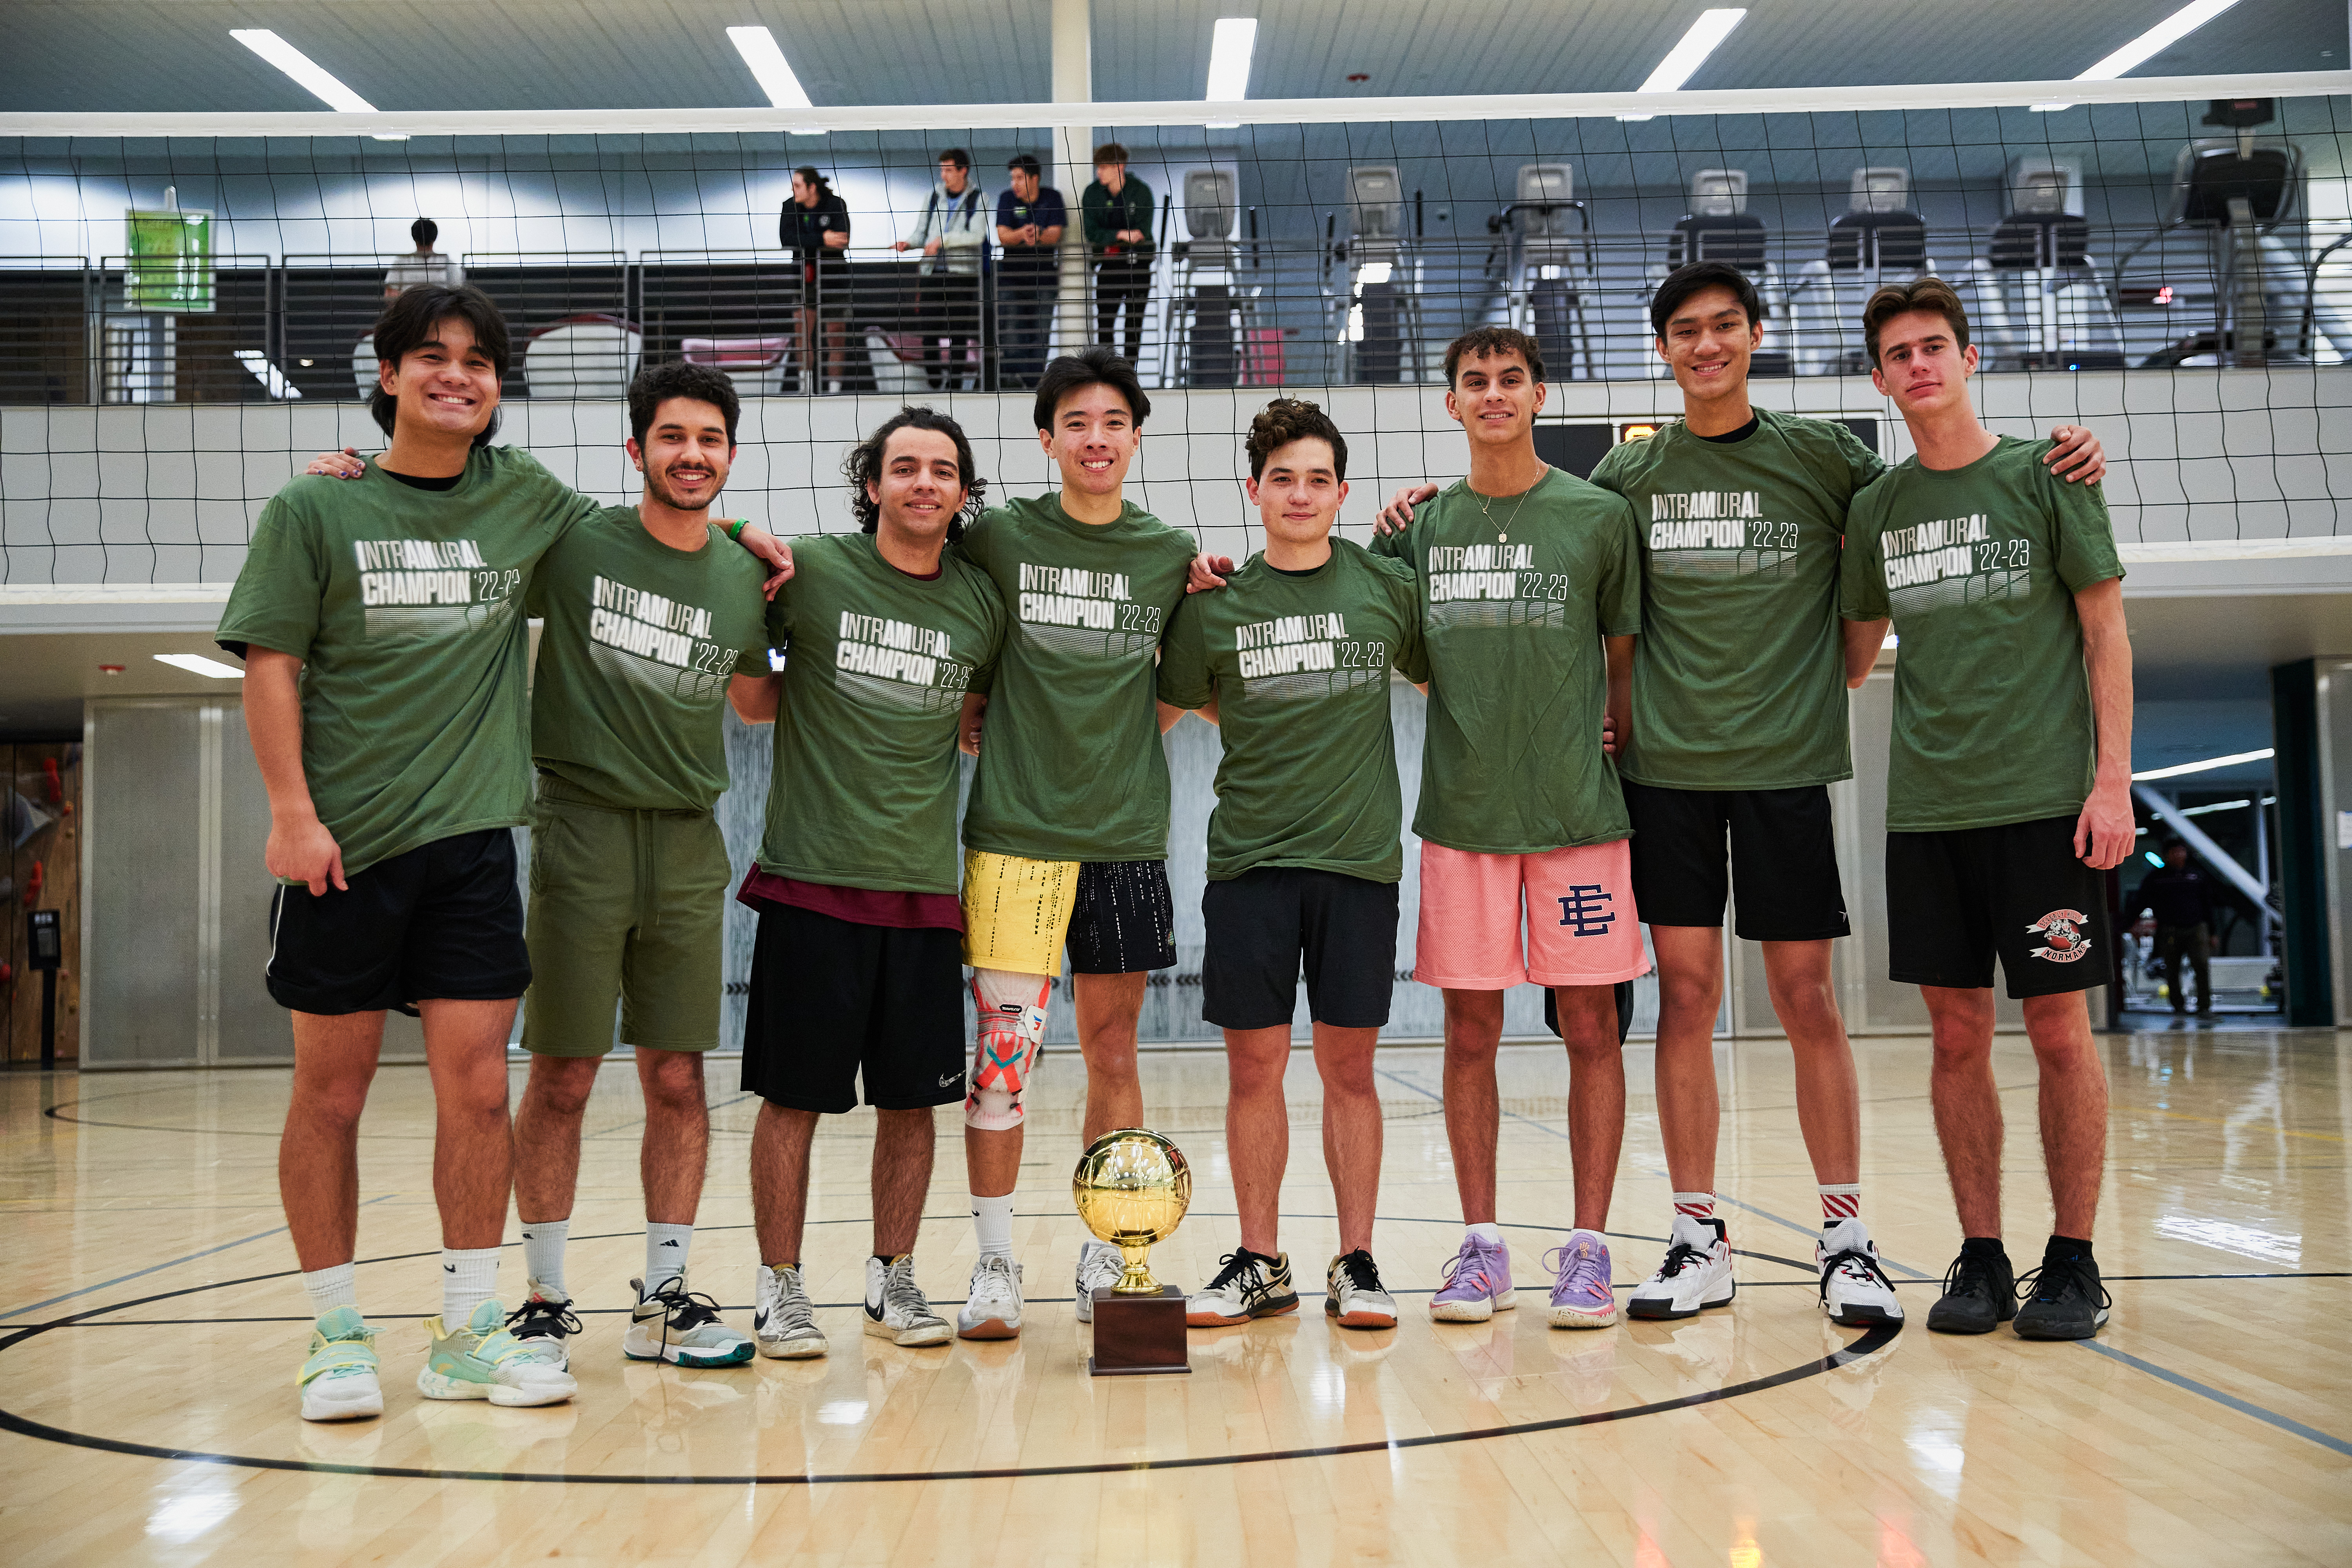 A group of students wearing Intramural Champion shirts smiling with a trophy.